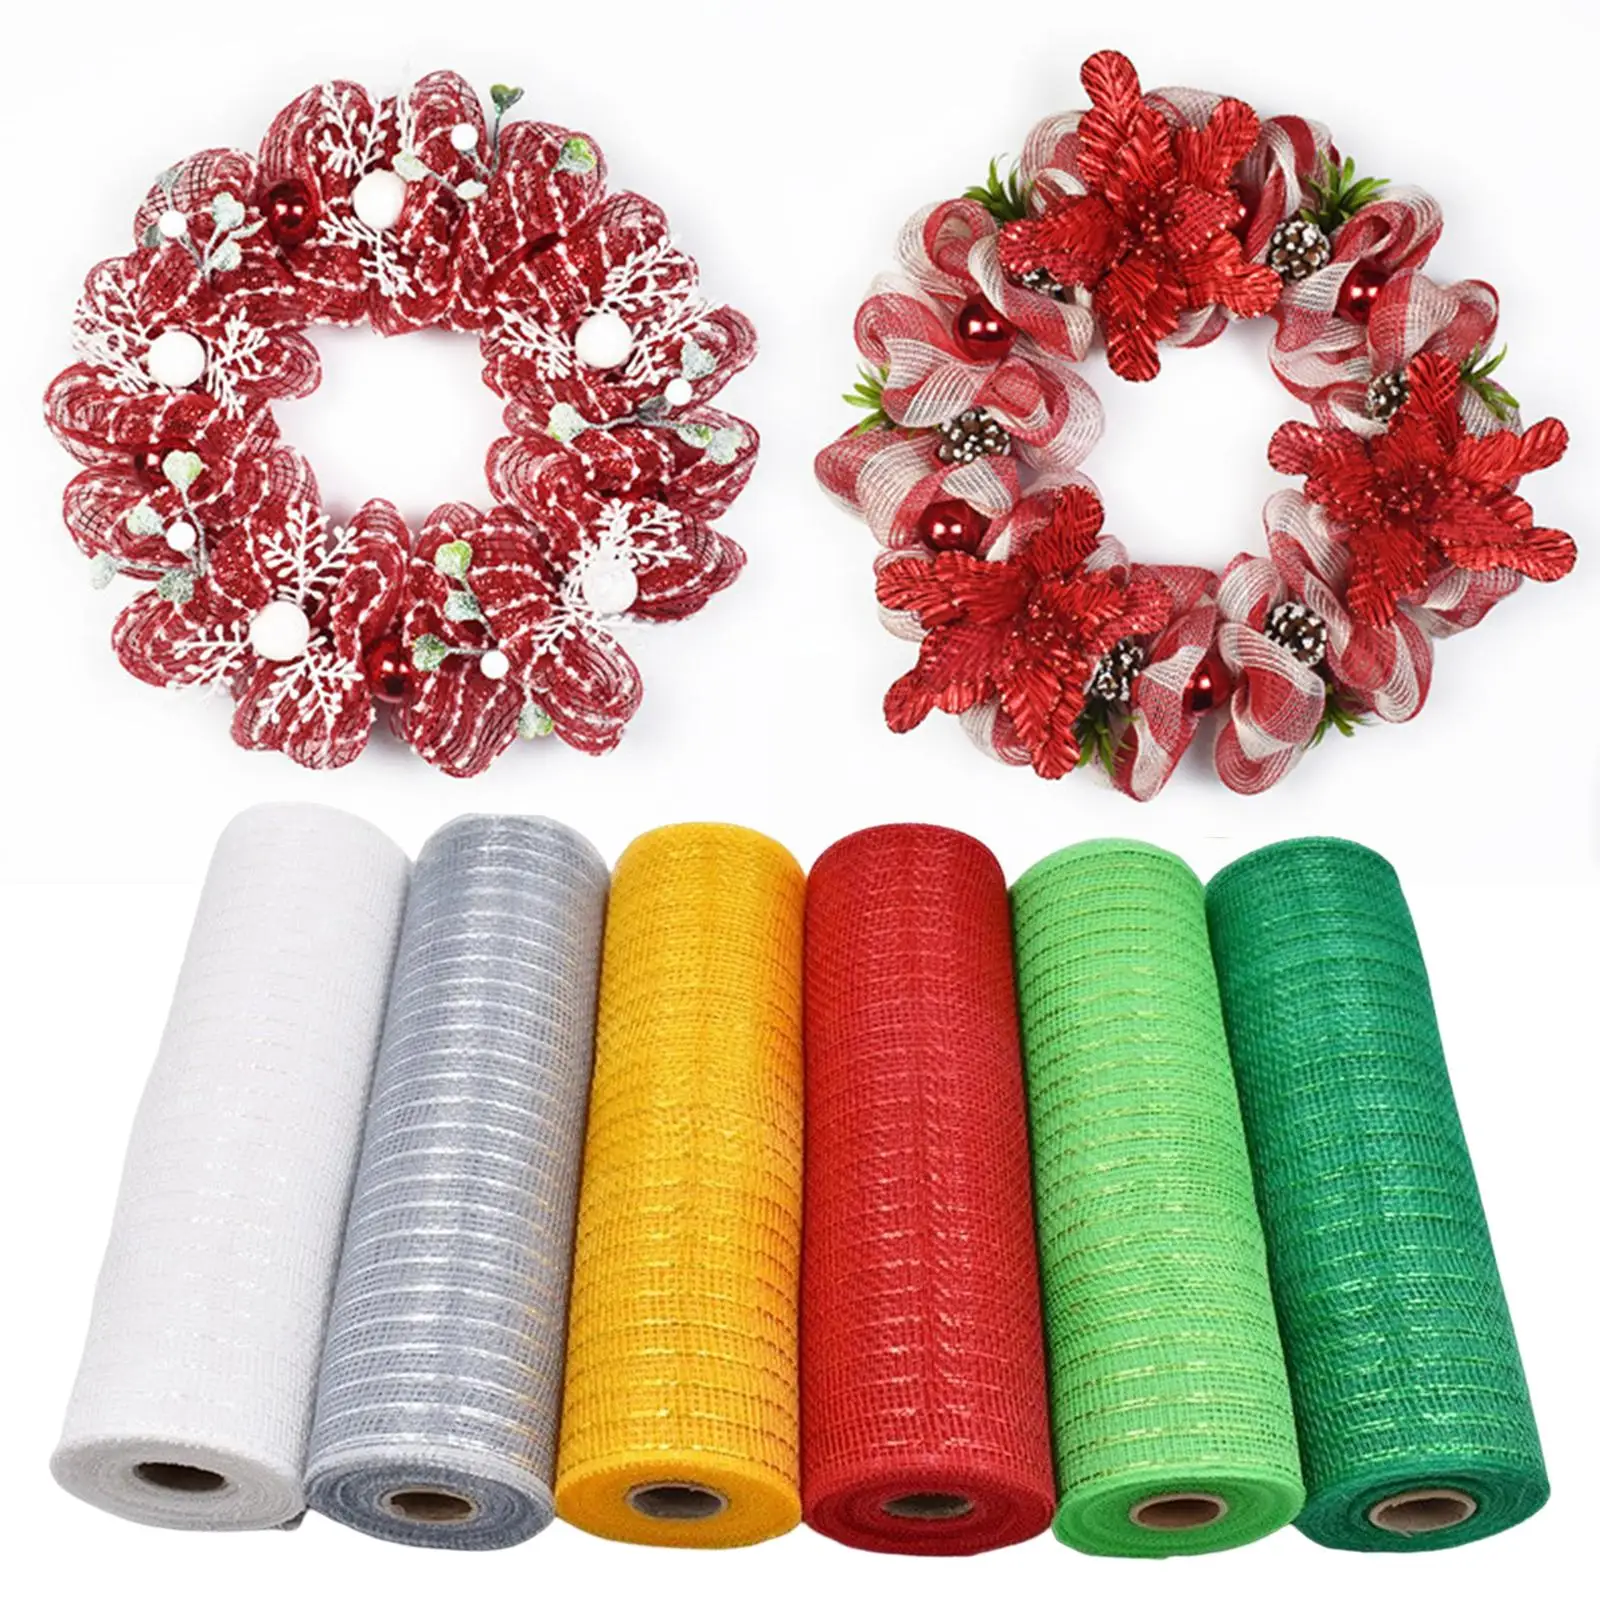 6x Mesh Ribbon Metallic Foil Rolls Durable Trimming Wrapping Ribbon for Wreath Party Decors Halloween Sewing Art Craft